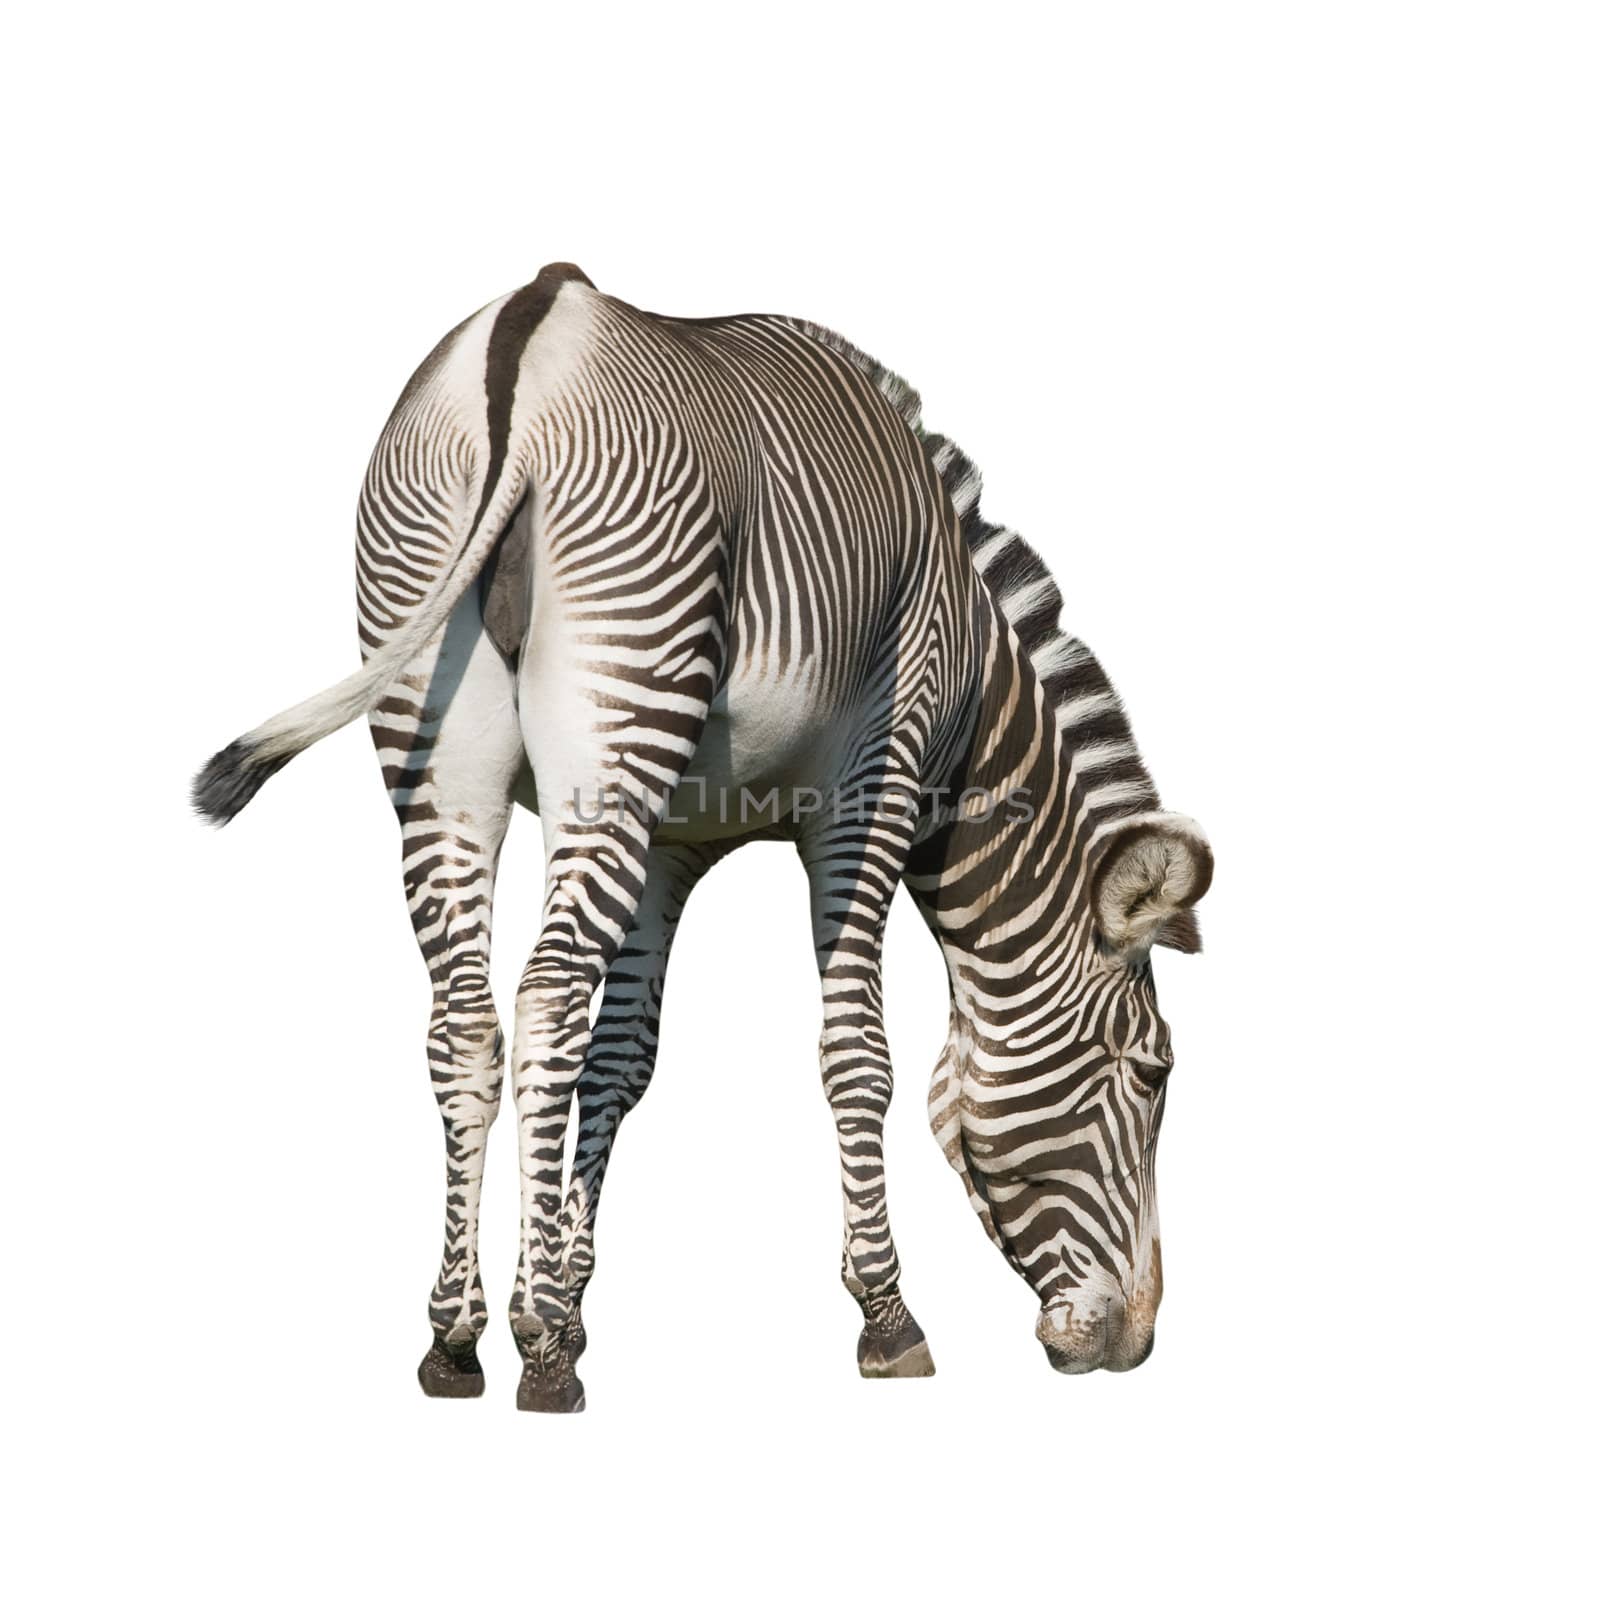 An isolated photo of a zebra on white background